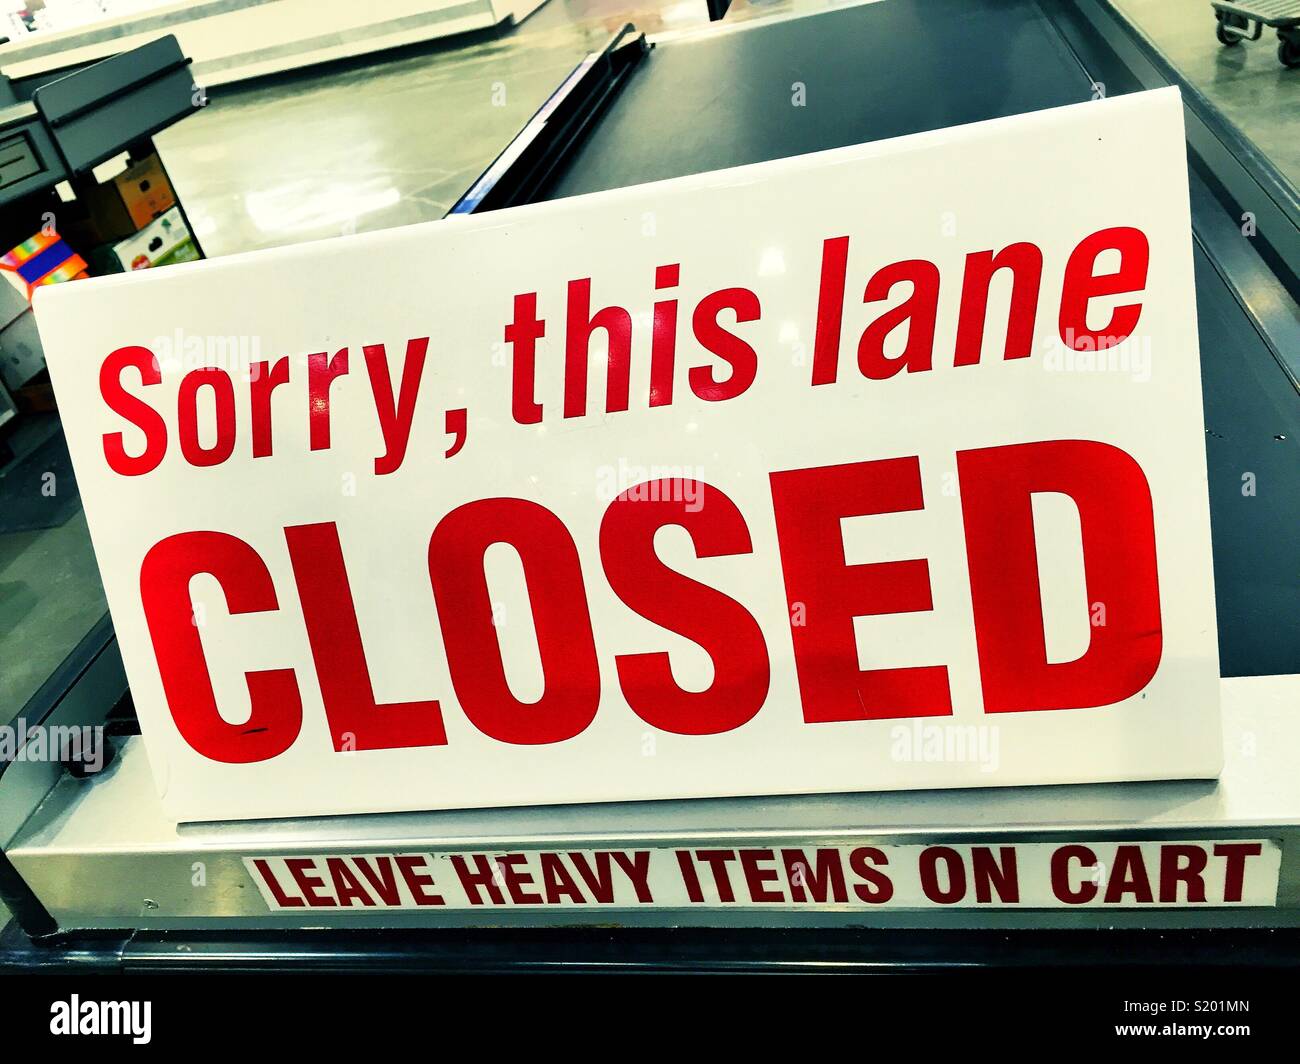 Sorry this lane closed sign at a checkout stand in a grocery store, USA Stock Photo